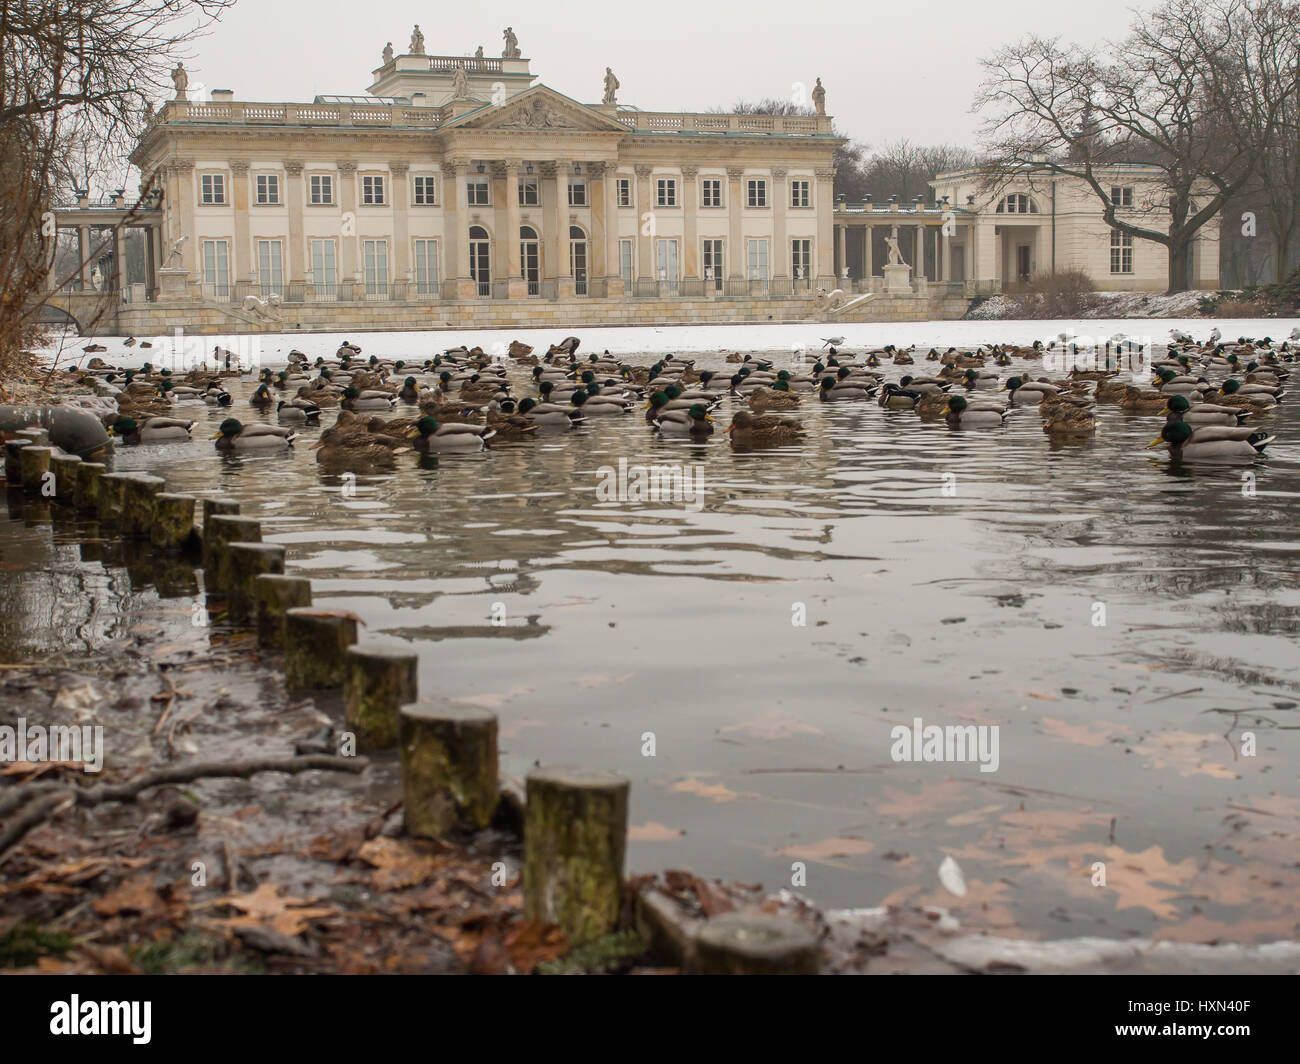 Warsaw, Poland - January 01, 2016: A View of the “Palace on the Water” in the Royal “Lazienki” park during  hard frosts in winter Stock Photo